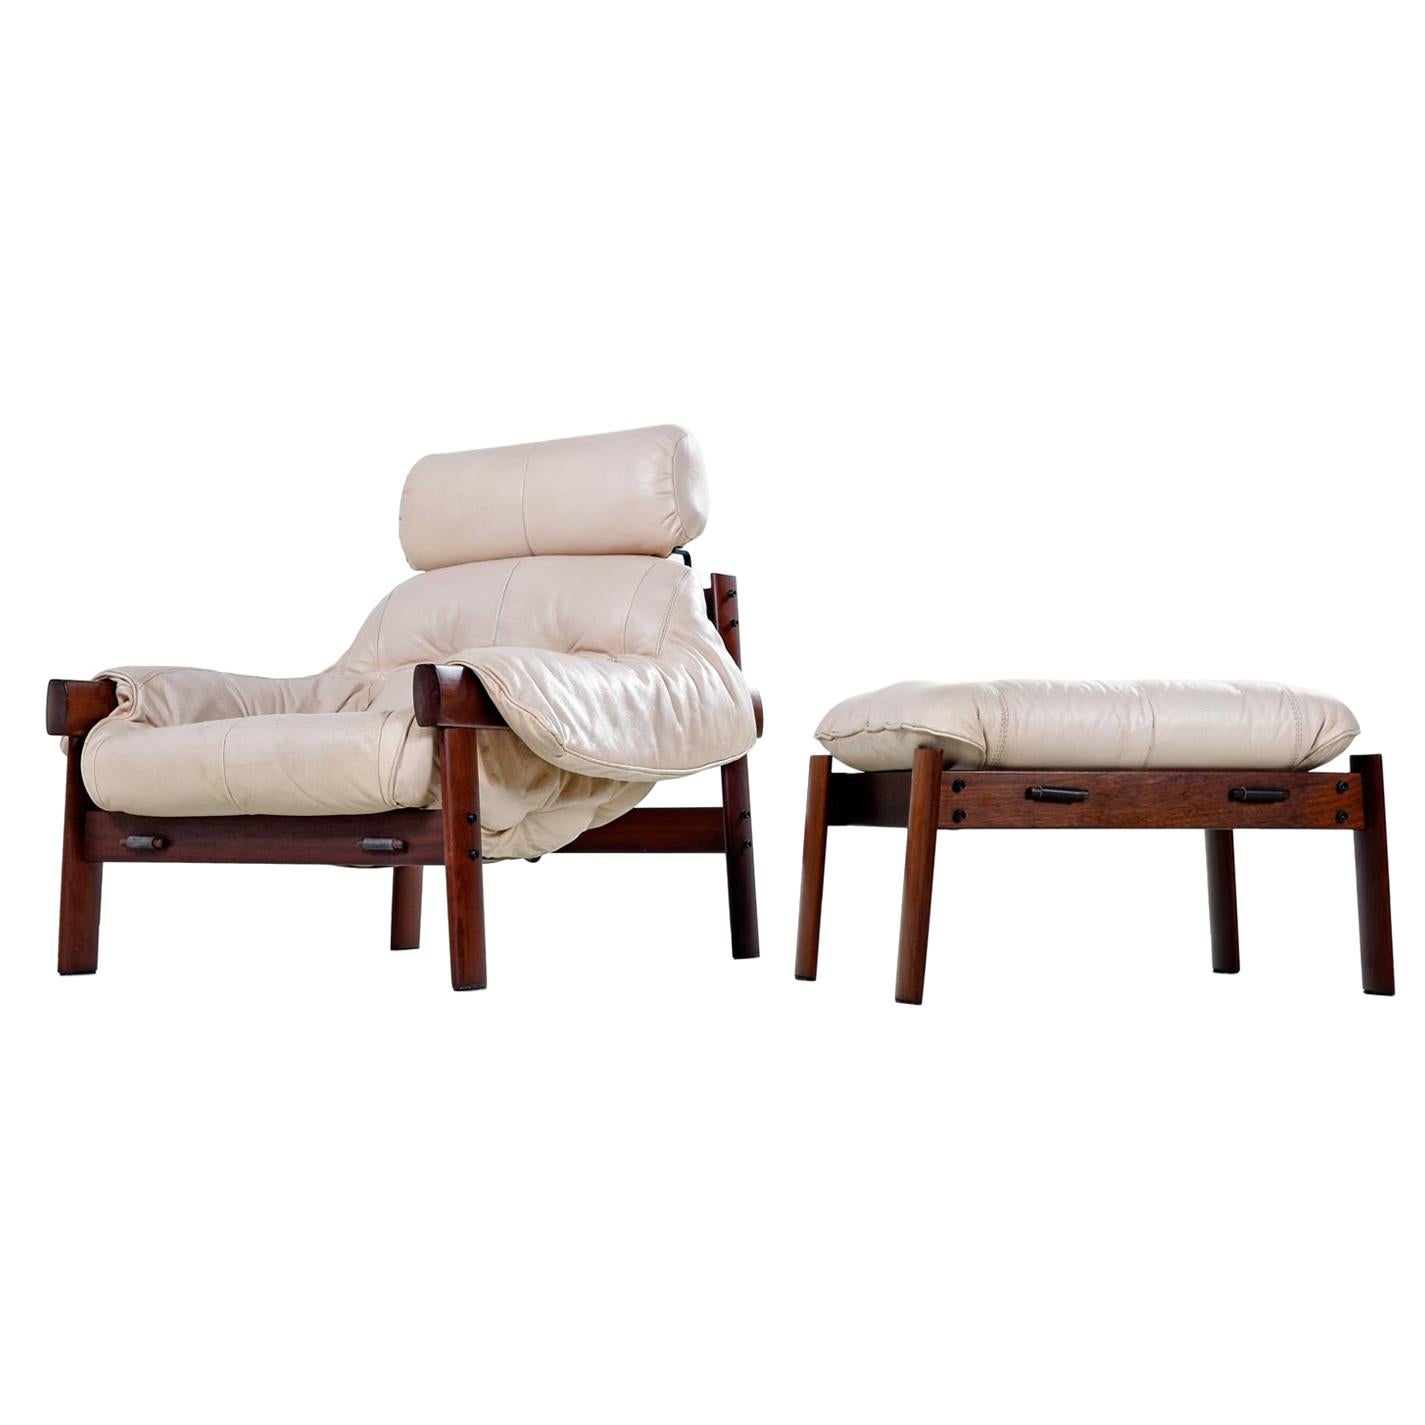 Percival Lafer Brazilian Blush Ivory Leather Rosewood Lounge Chair and Ottoman